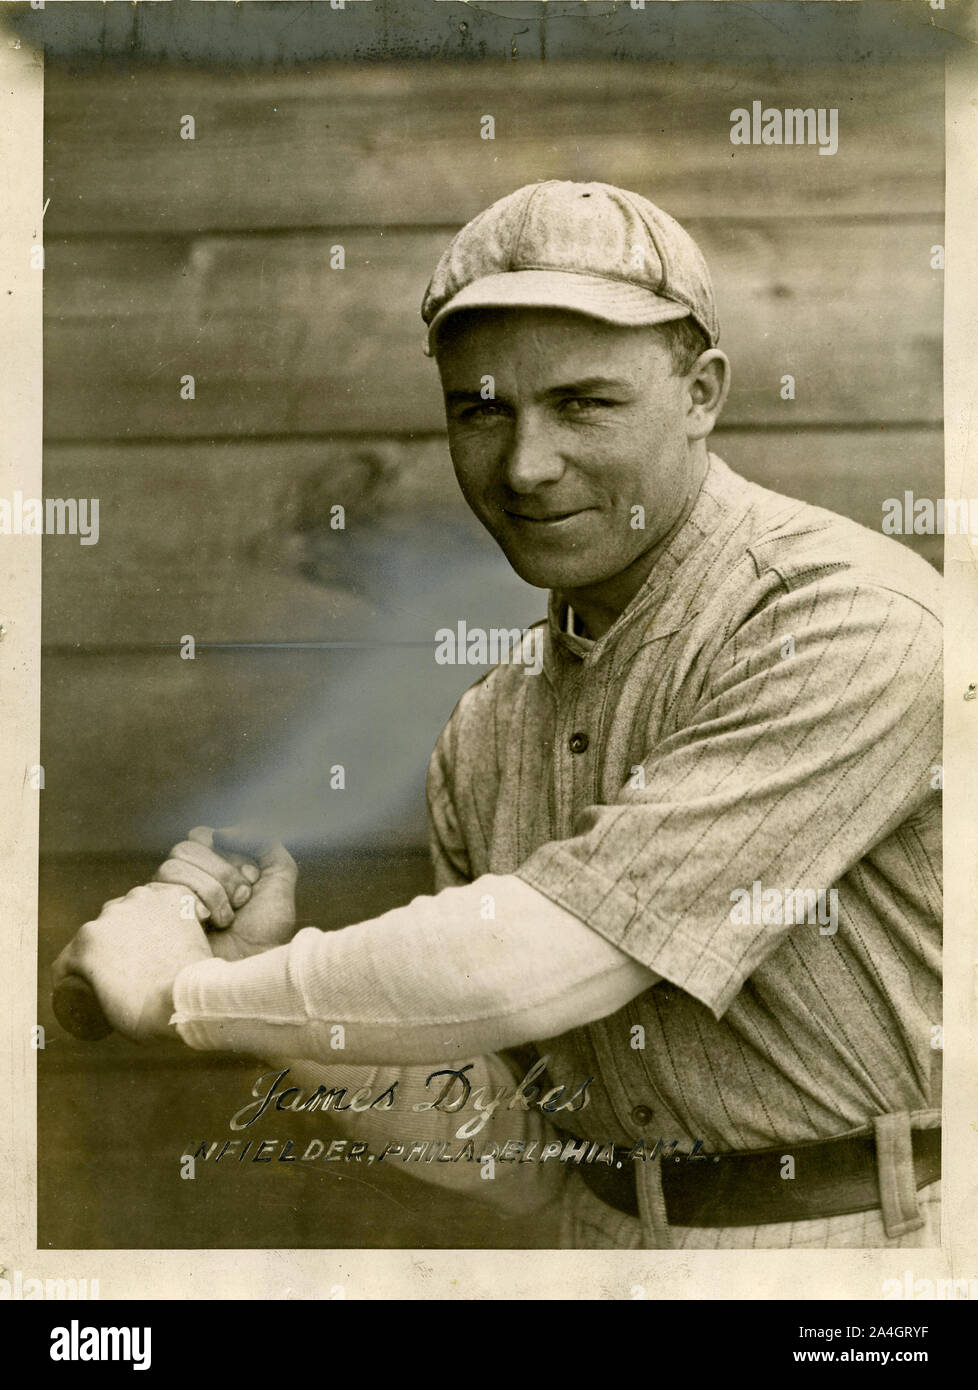 Vintage photograph of Hall of Fame baseball player Jimmy Dykes with the Philadelphia Athletics. Stock Photo